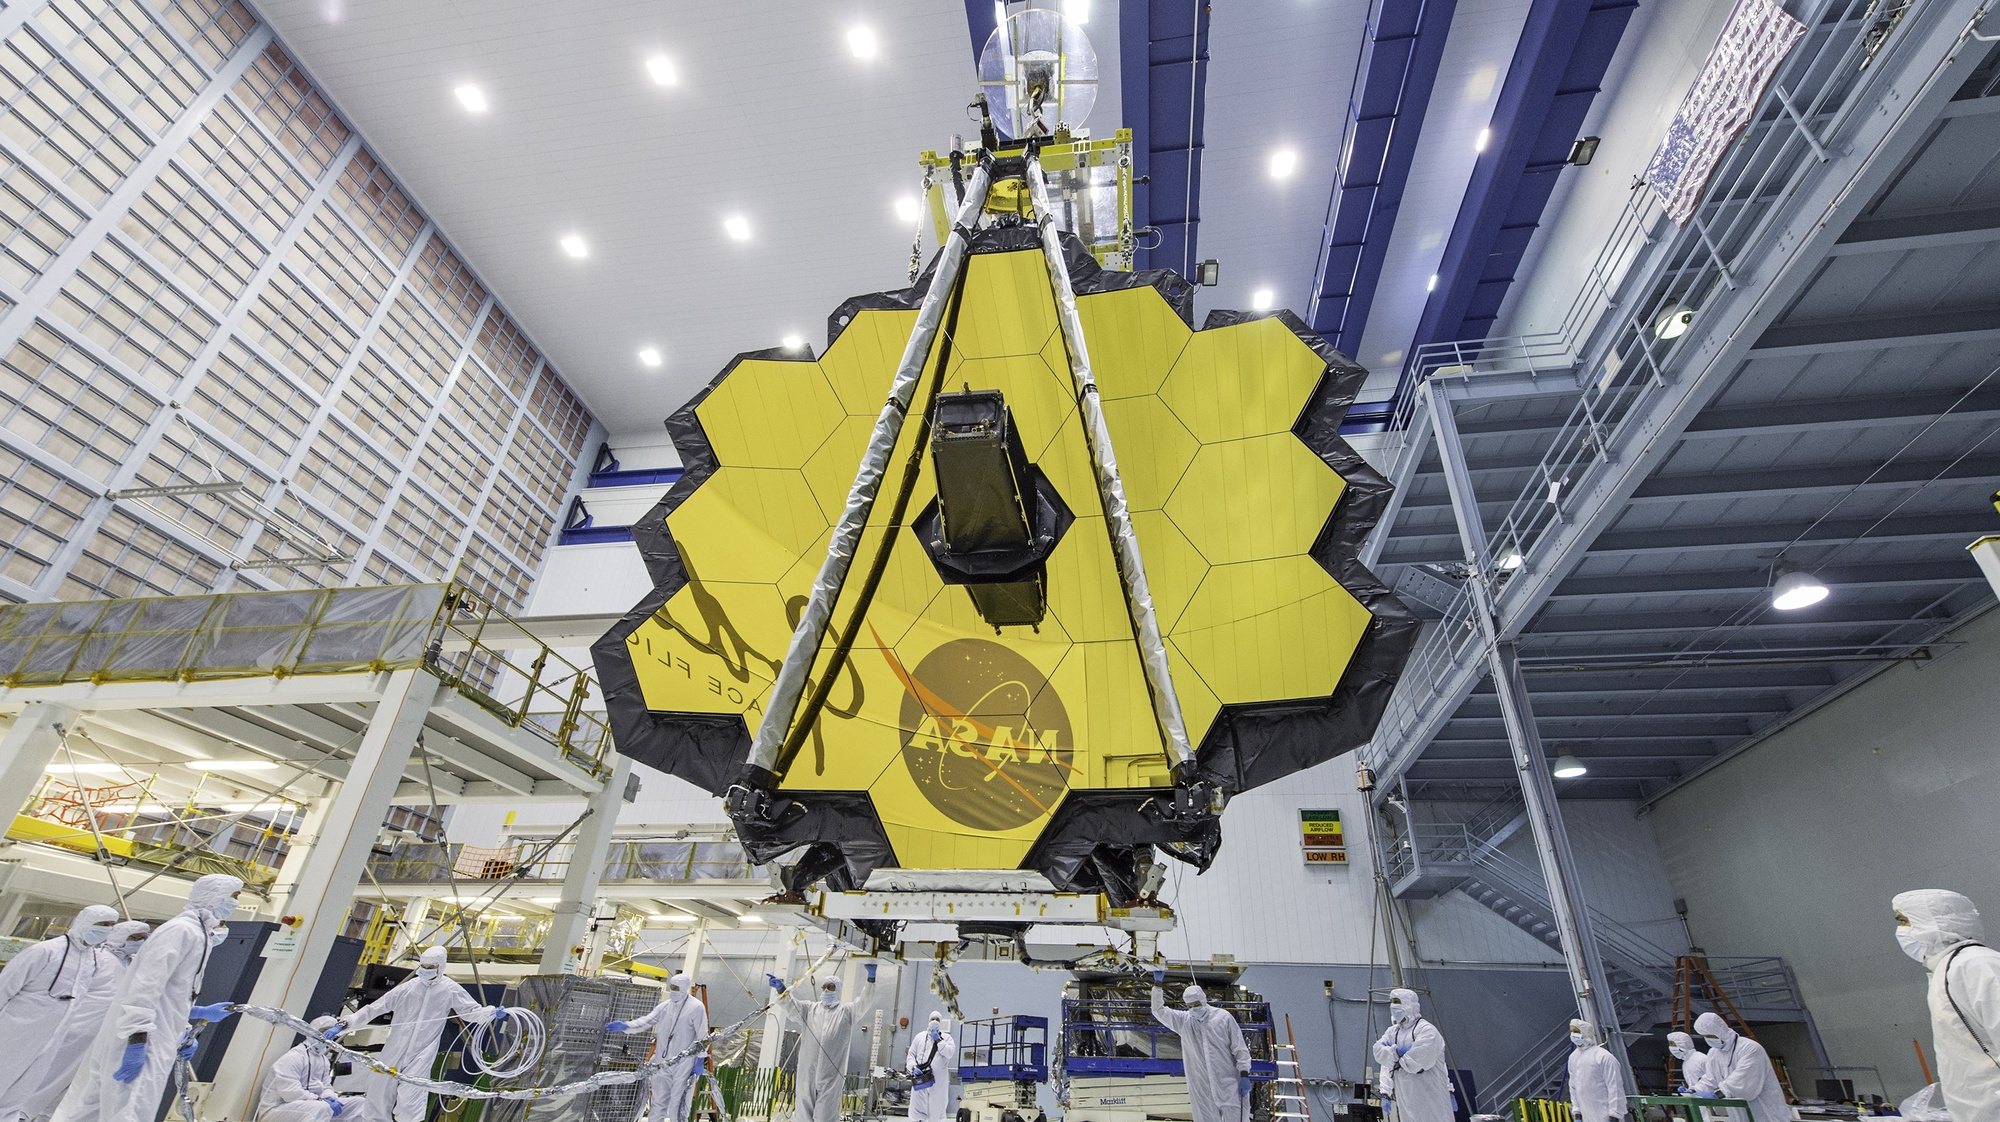 epa09614360 (FILE) - An undated handout file picture made available by the National Aeronautics and Space Administration (NASA) shows NASA technicians lifting the James Webb Space Telescope using a crane and moving it inside a clean room at NASA&#039;s Goddard Space Flight Center in Greenbelt, Maryland, USA (issued 01 December 2021). According to NASA, engineering teams have completed additional testing confirming NASA&#039;s James Webb Space Telescope (JWST) is ready for flight, and launch preparations are resuming toward Webb&#039;s target launch date on 22 December 2021, at 7:20 a.m. EST. Webb&#039;s primary mirror will collect light for the observatory in the scientific quest to better understand our solar system and beyond. The JWST is an international project led by NASA with its European (ESA) and Canadian (CSA) partners.  EPA/NASA/Desiree Stover HANDOUT  HANDOUT EDITORIAL USE ONLY/NO SALES